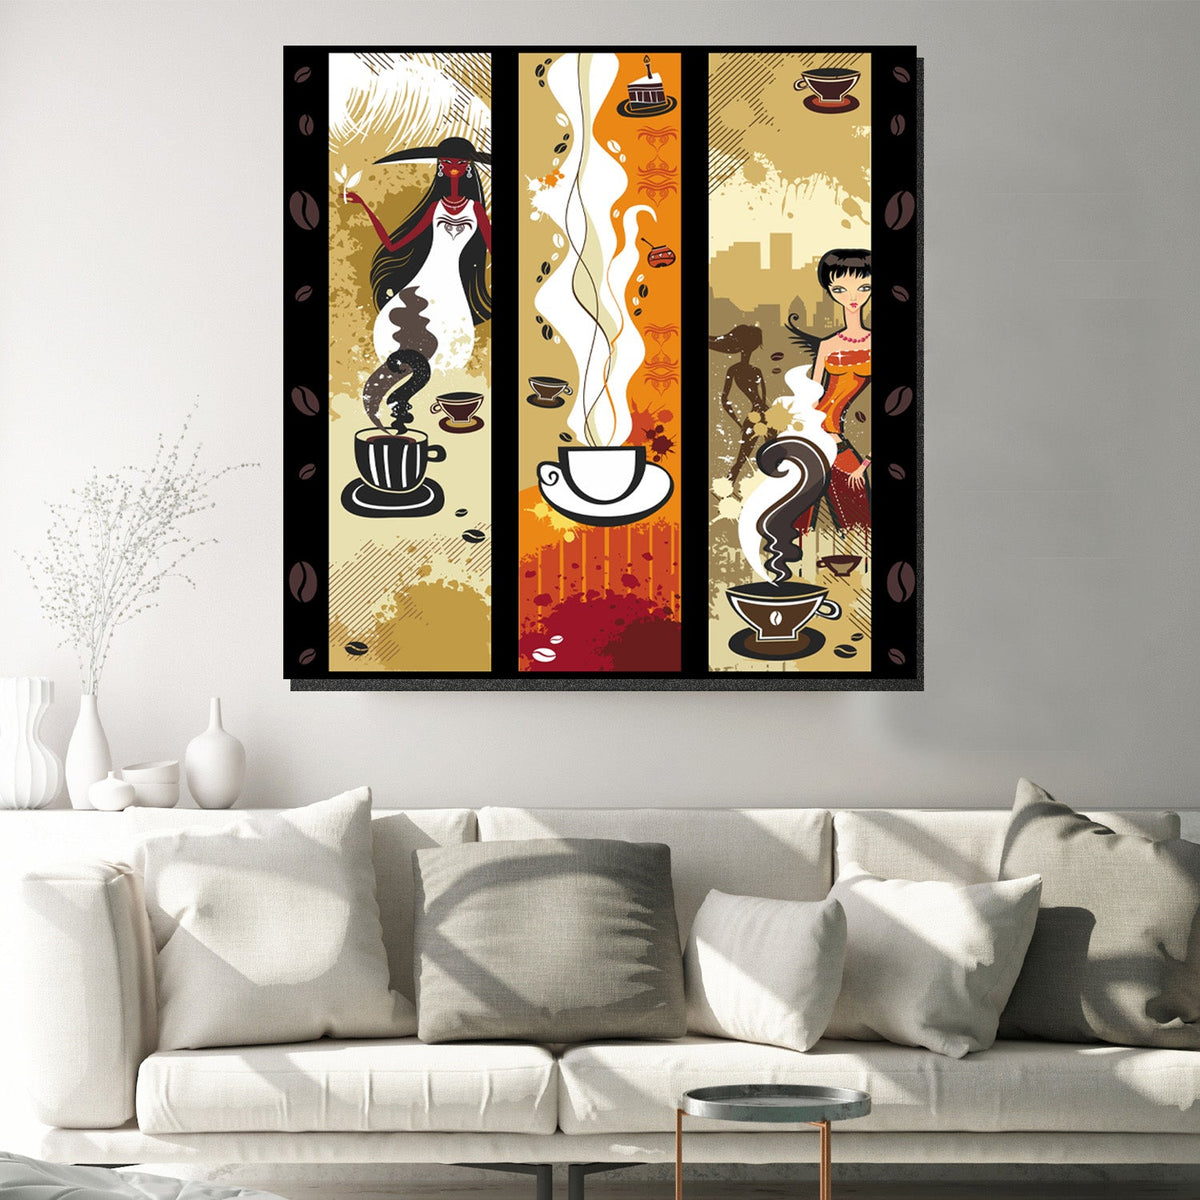 https://cdn.shopify.com/s/files/1/0387/9986/8044/products/FunkyCoffeePosterCanvasArtprintStretched-4.jpg